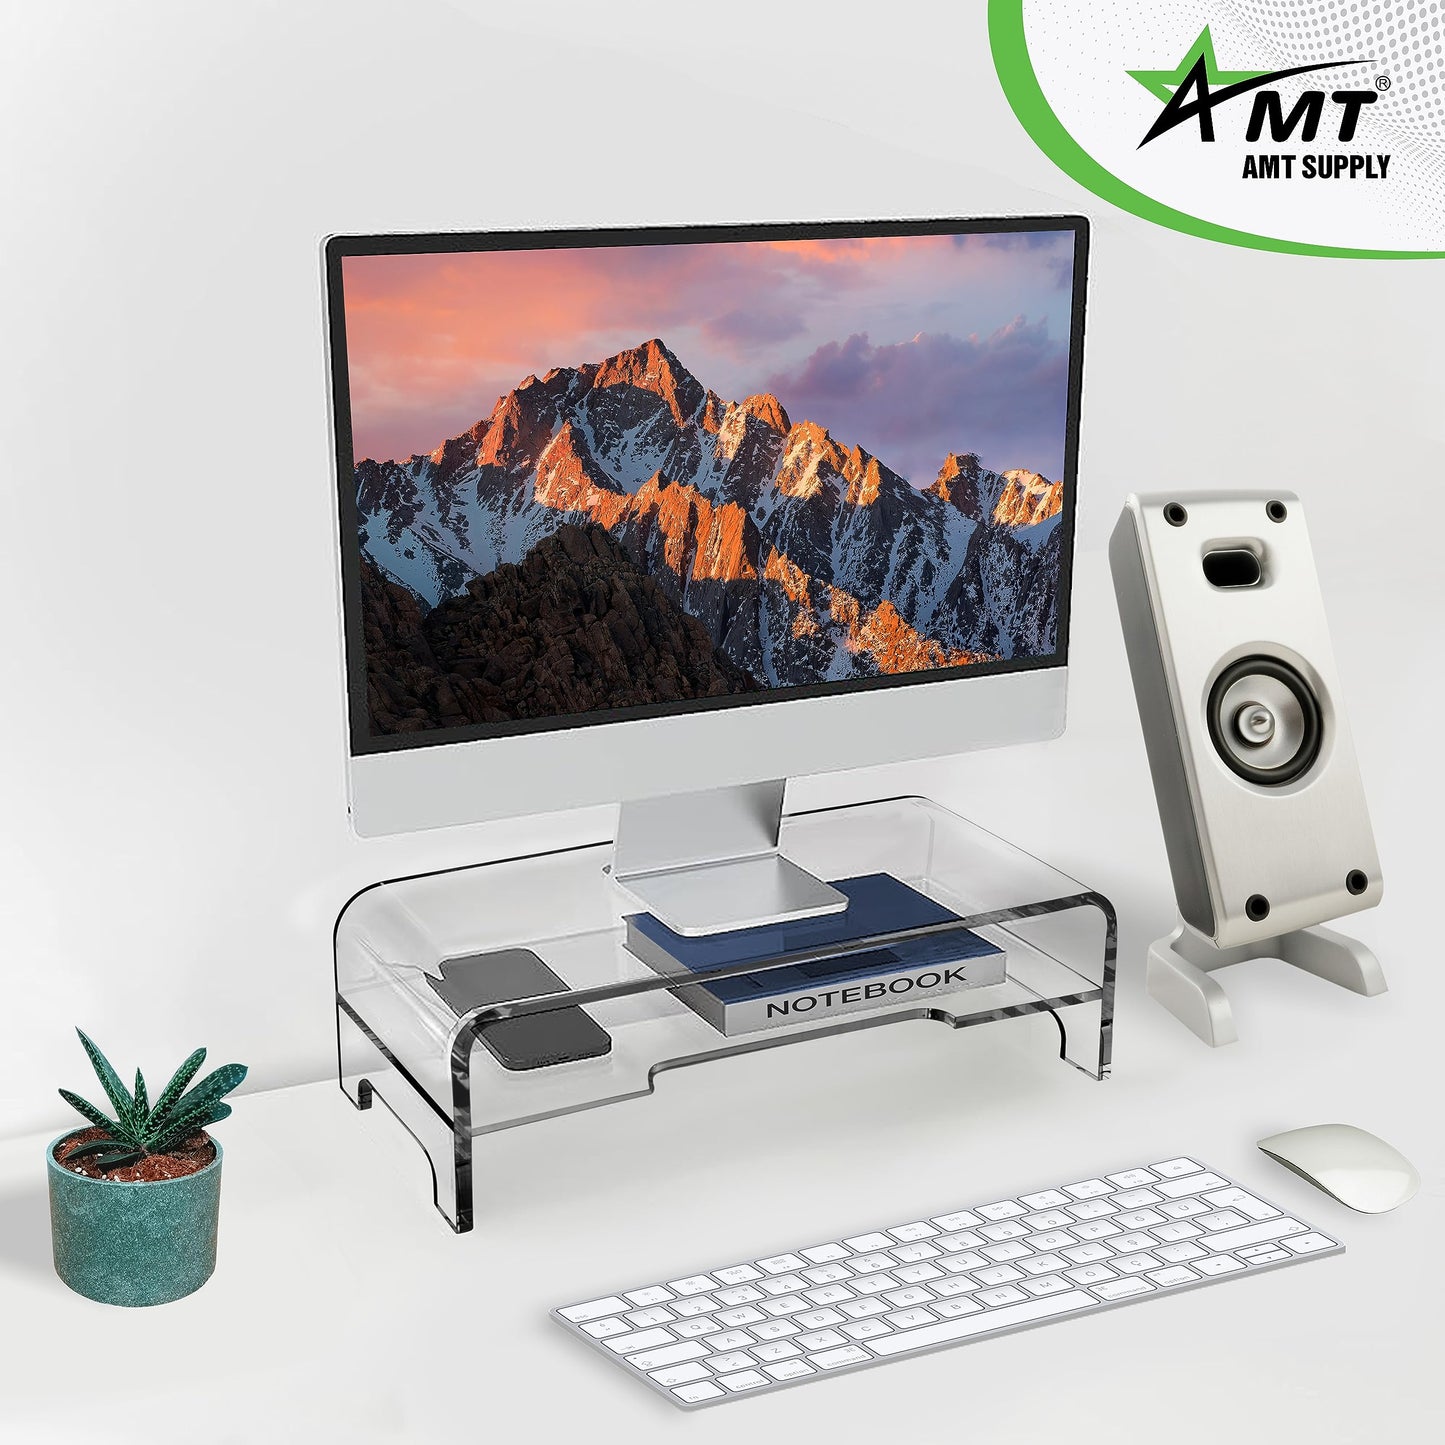 AMT 2 Tier 5.5 Inch High AMT Clear Acrylic Monitor Stand Riser Clear Computer with Cat Keyboard Protector, Space-Saving Design, Extra Storage, Clear Shelf - Ideal for Monitors, Laptops, Printers,